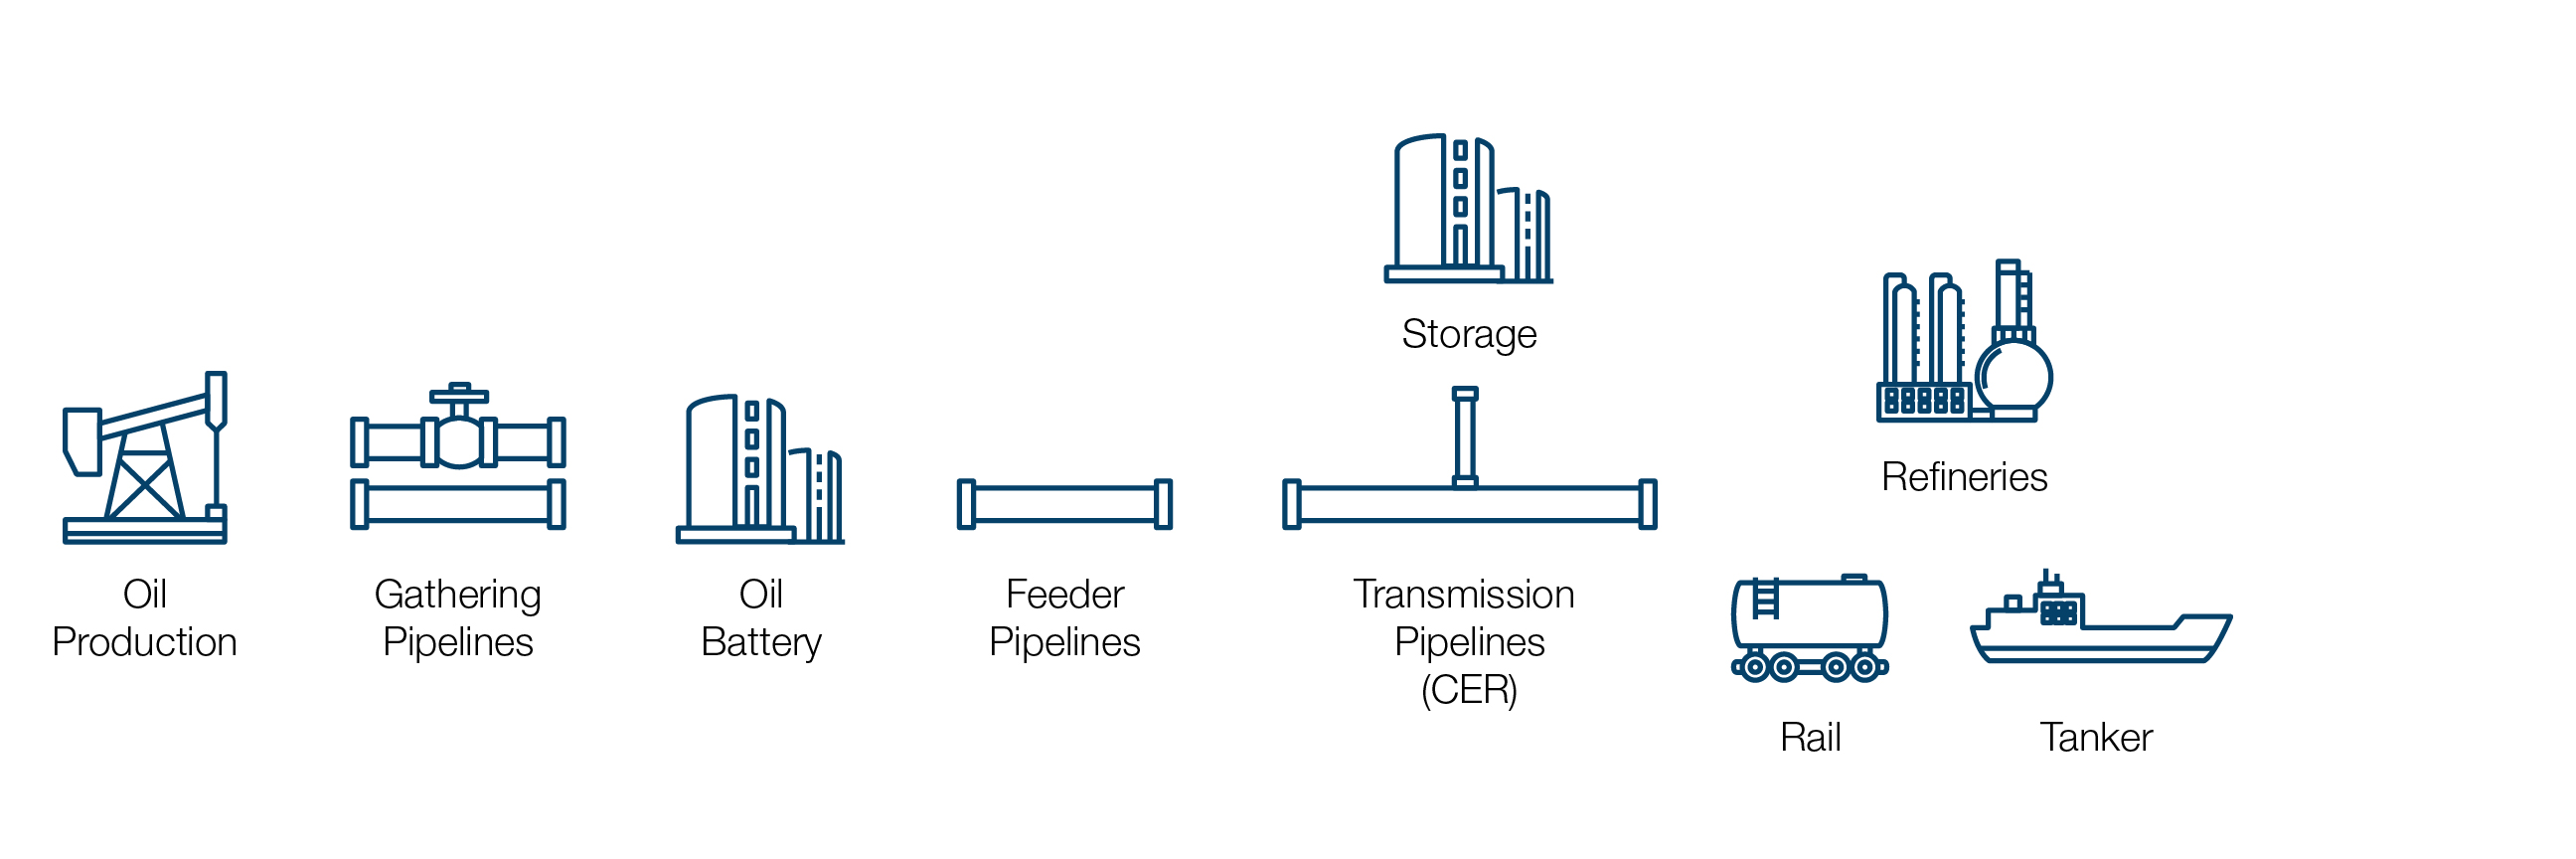 Crude Oil Pipeline System Overview